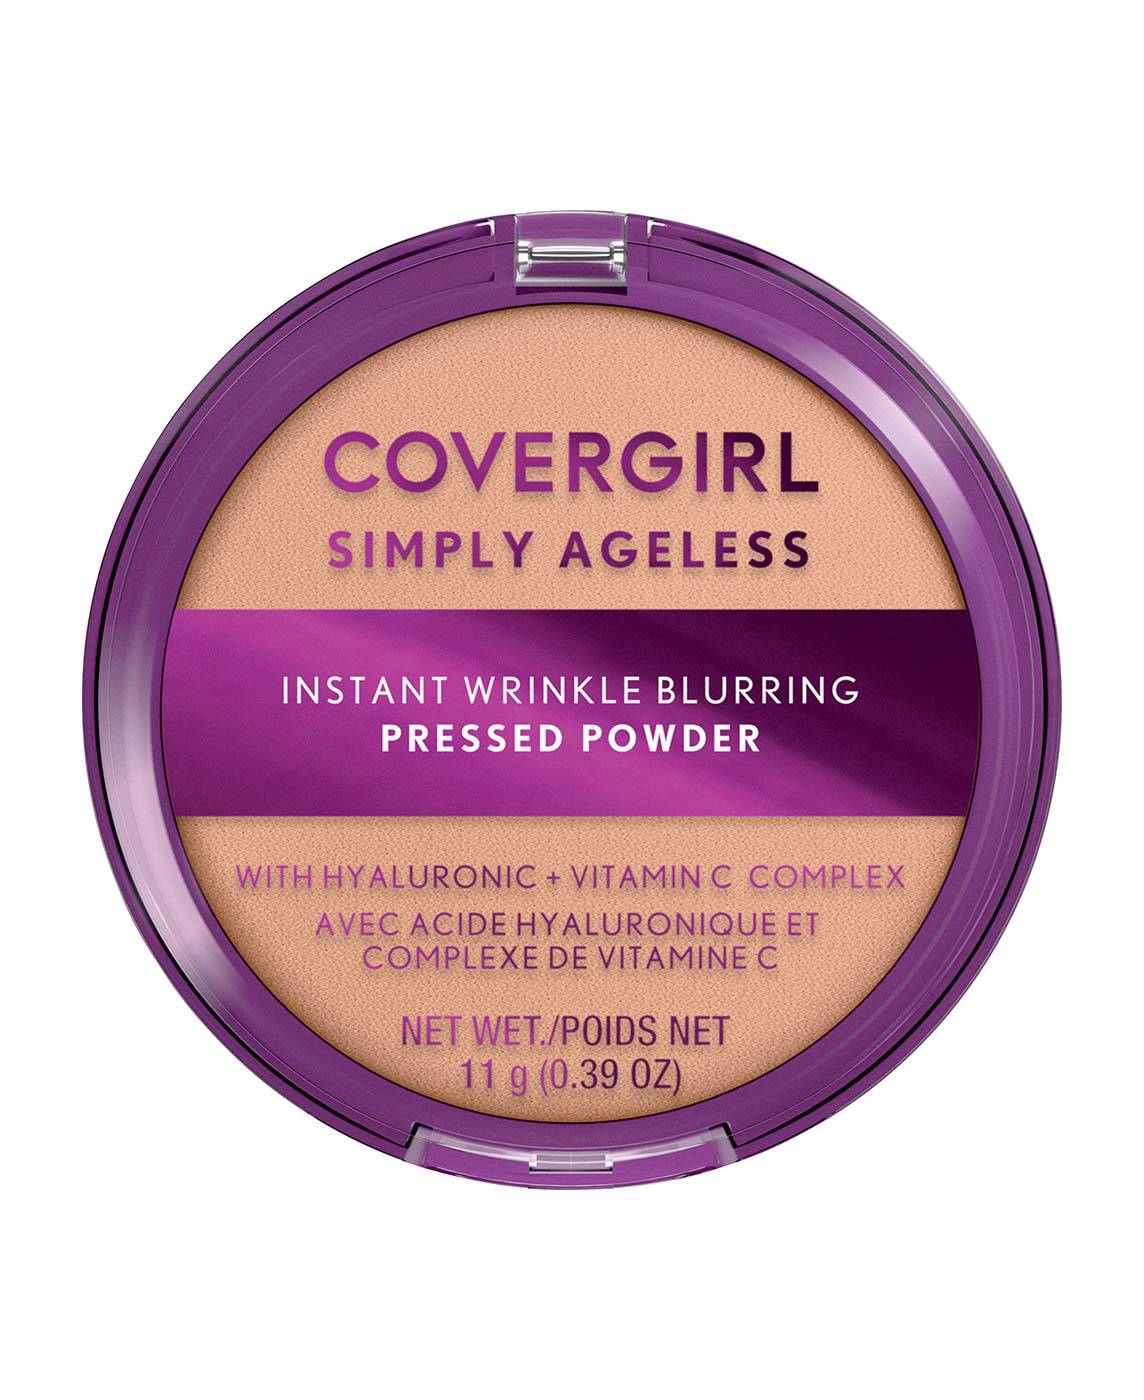 Covergirl Simply Ageless Pressed Powder 210 Classic Ivory; image 1 of 10